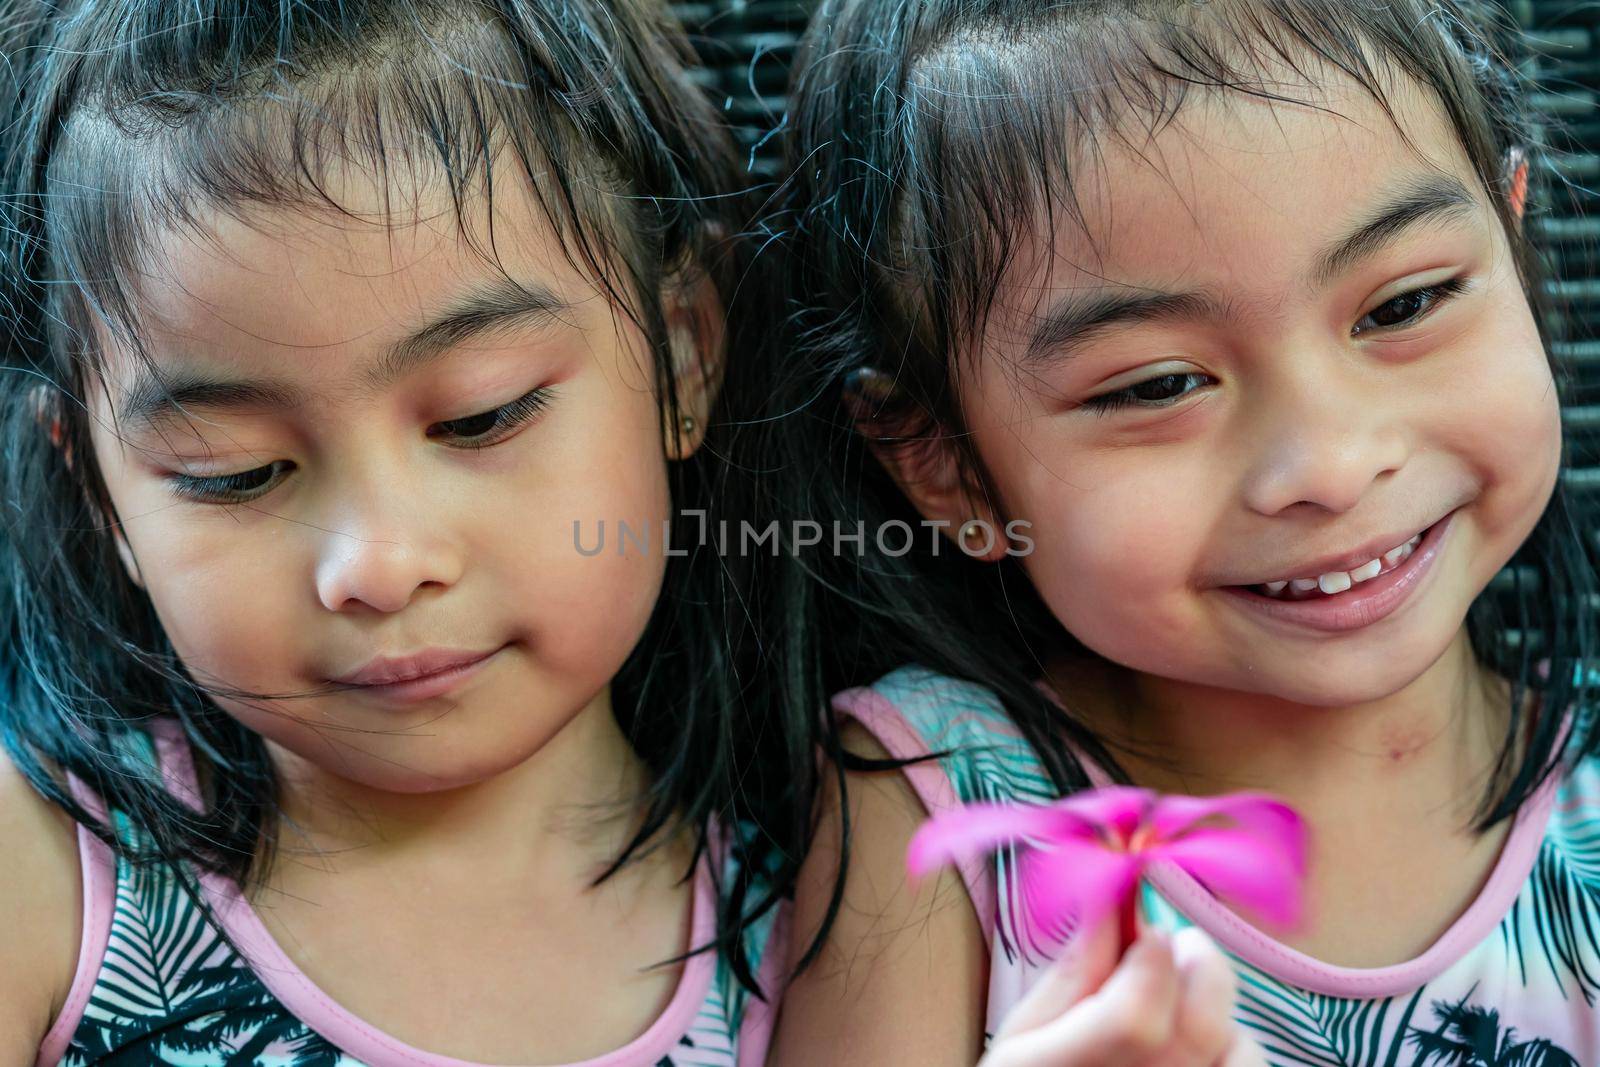 Pretty child twins holding a pink flower. Pretty asian twins portrait with flower and smiling by billroque